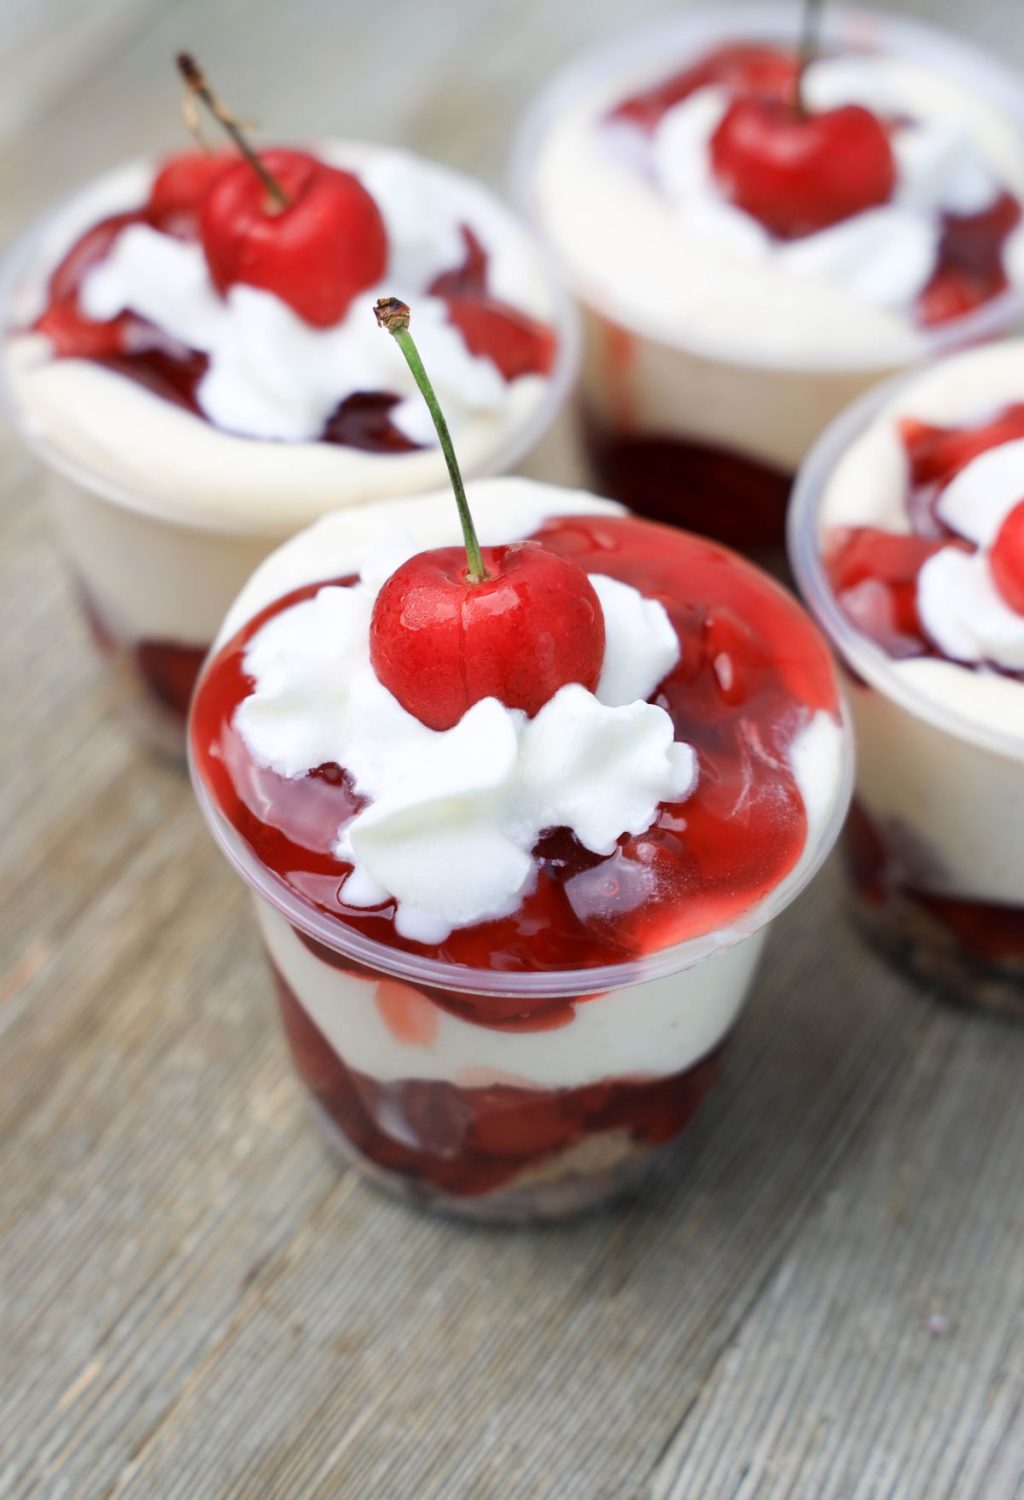 Cherry cheesecake cups with whipped cream and cherries.